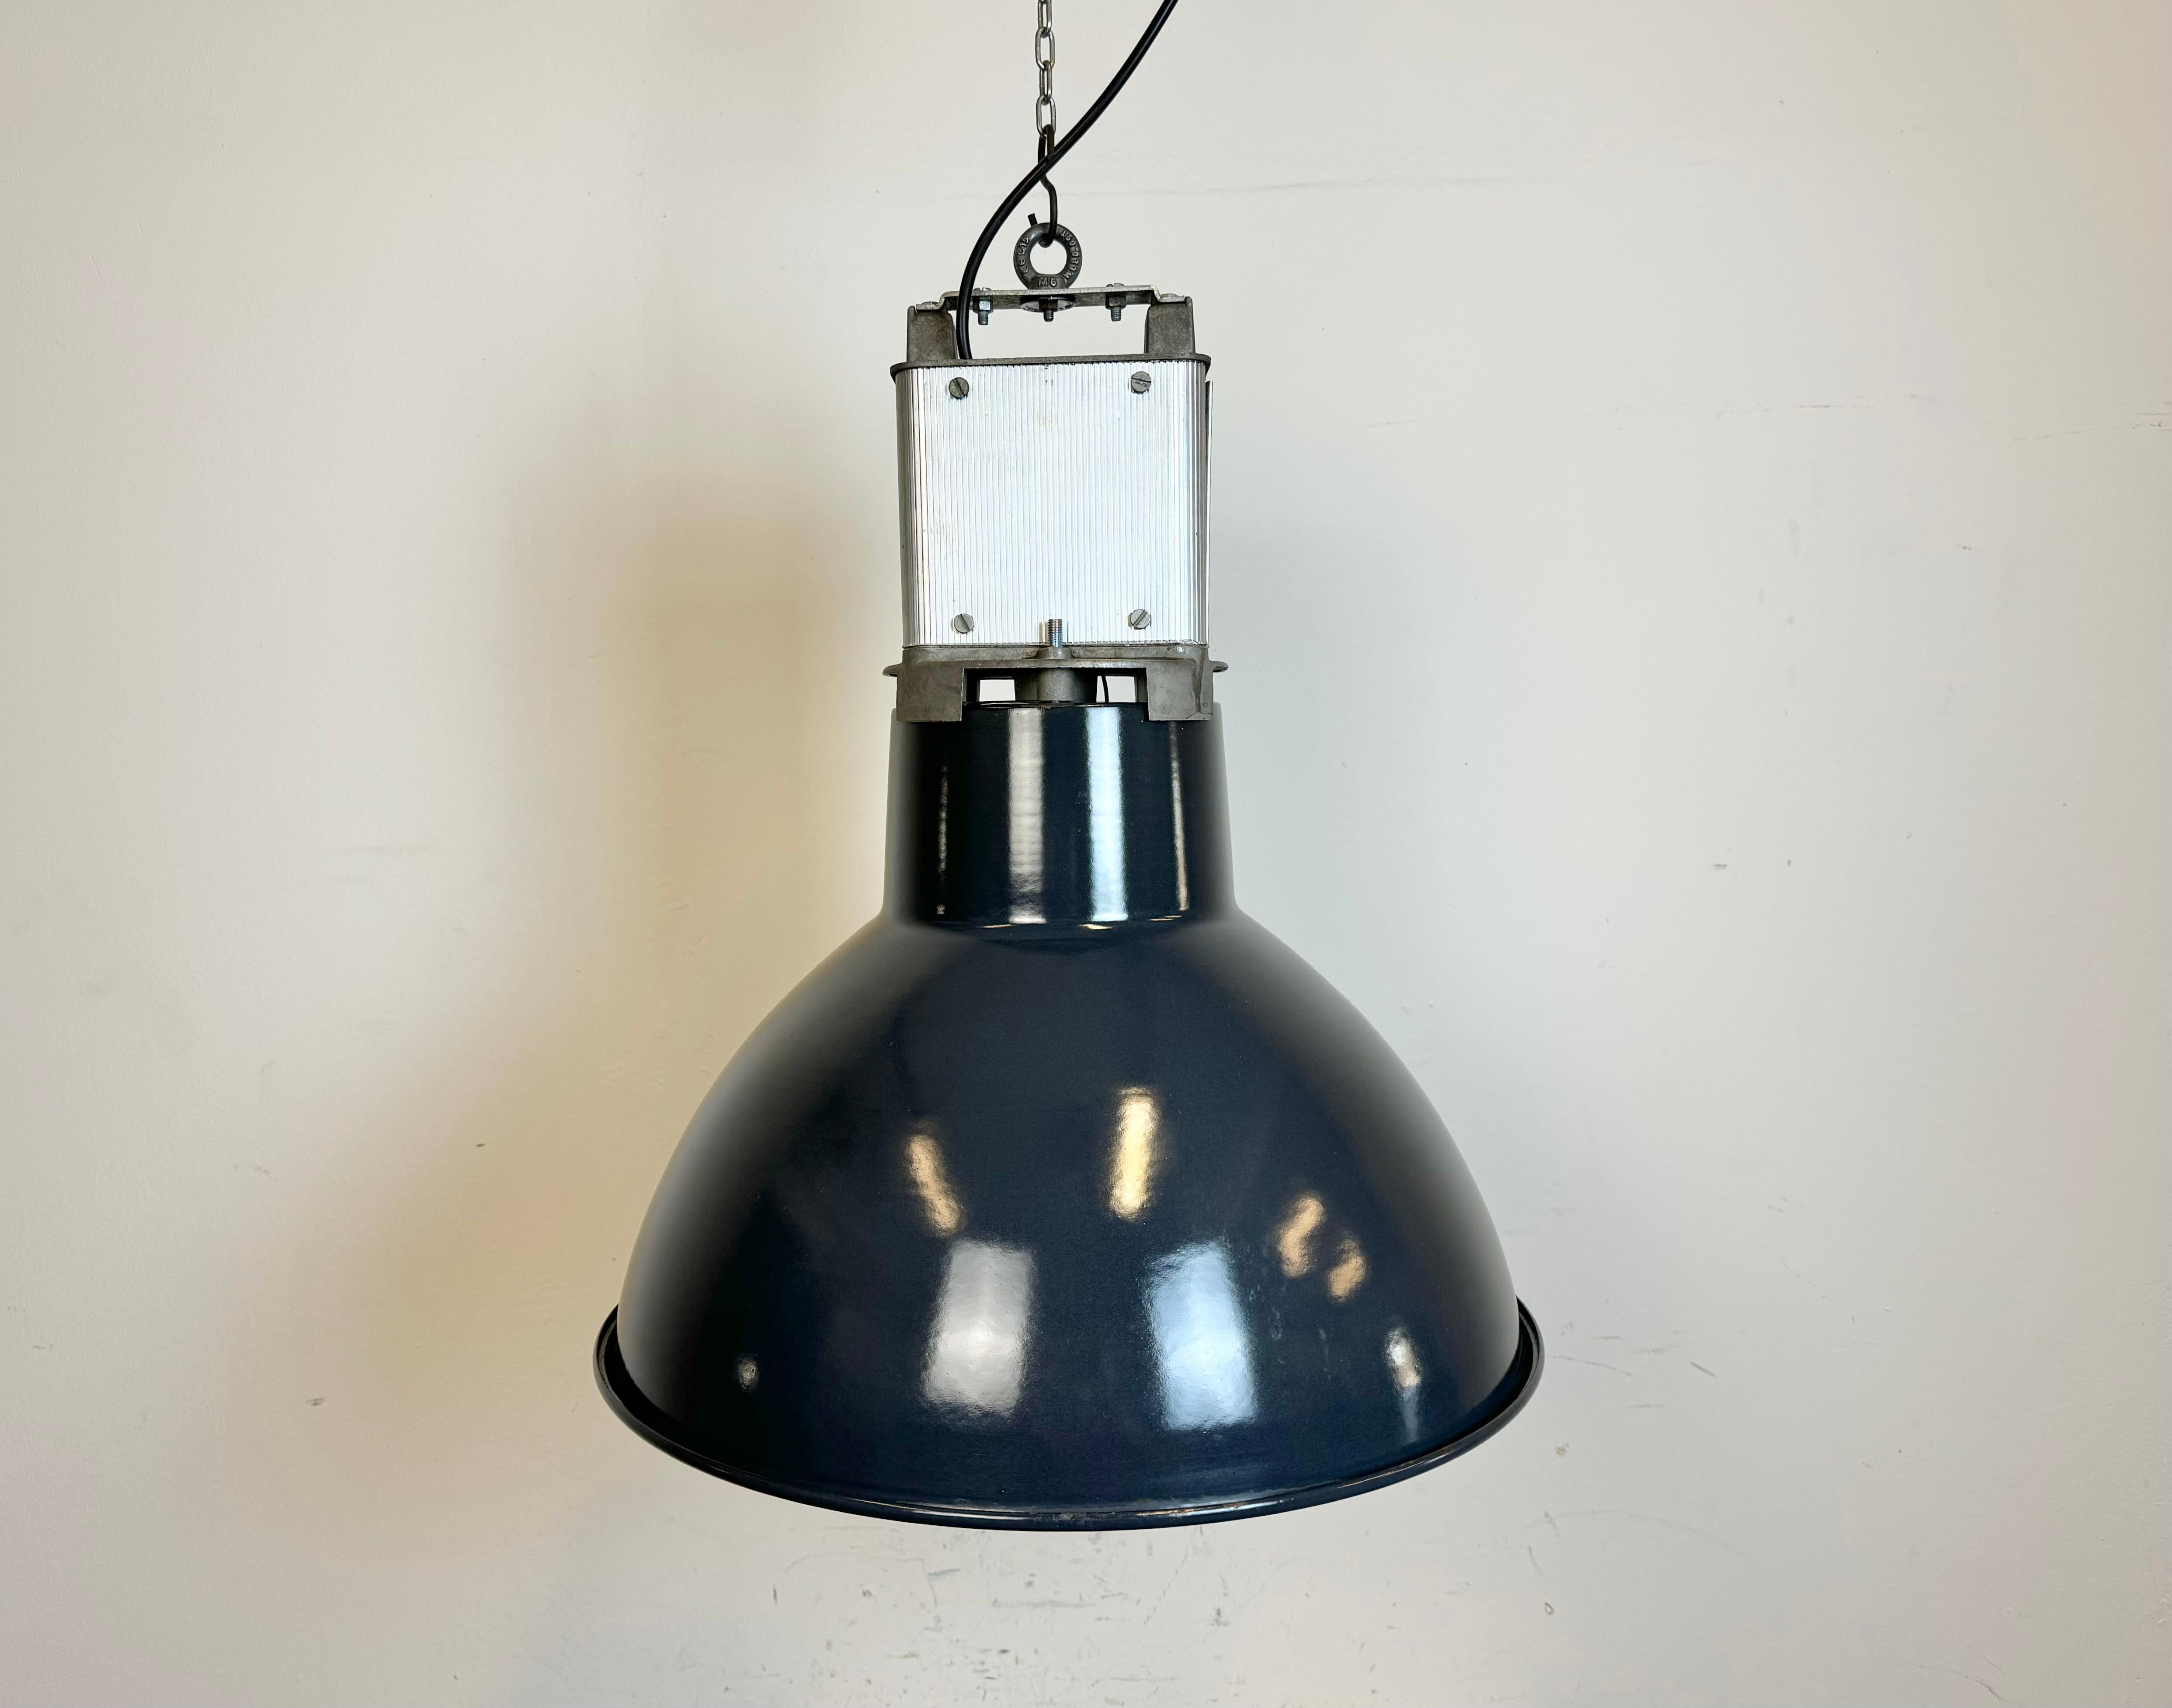 This industrial lamp was made by MAZDA in France during the 1960s. It features a dark blue enamel shade with white enamel interior and metal top. New porcelain socket requires standard E 27/ E26 light bulbs. New wire. The weight of the lamp is 4